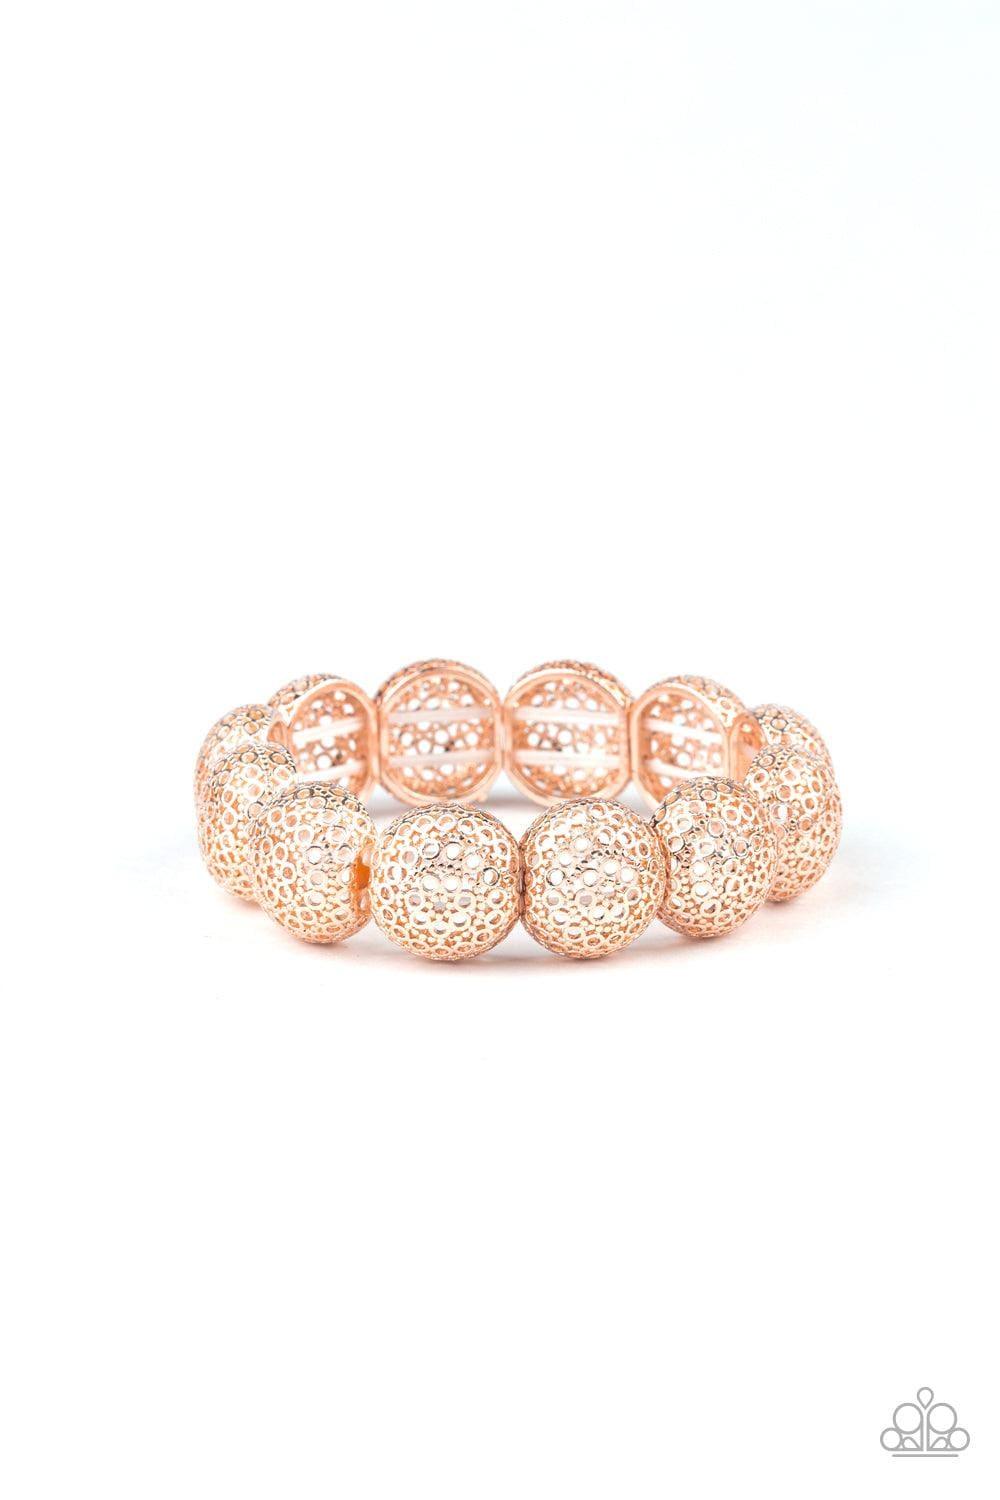 Paparazzi Accessories - Obviously Ornate - Rose Gold Bracelet - Bling by JessieK